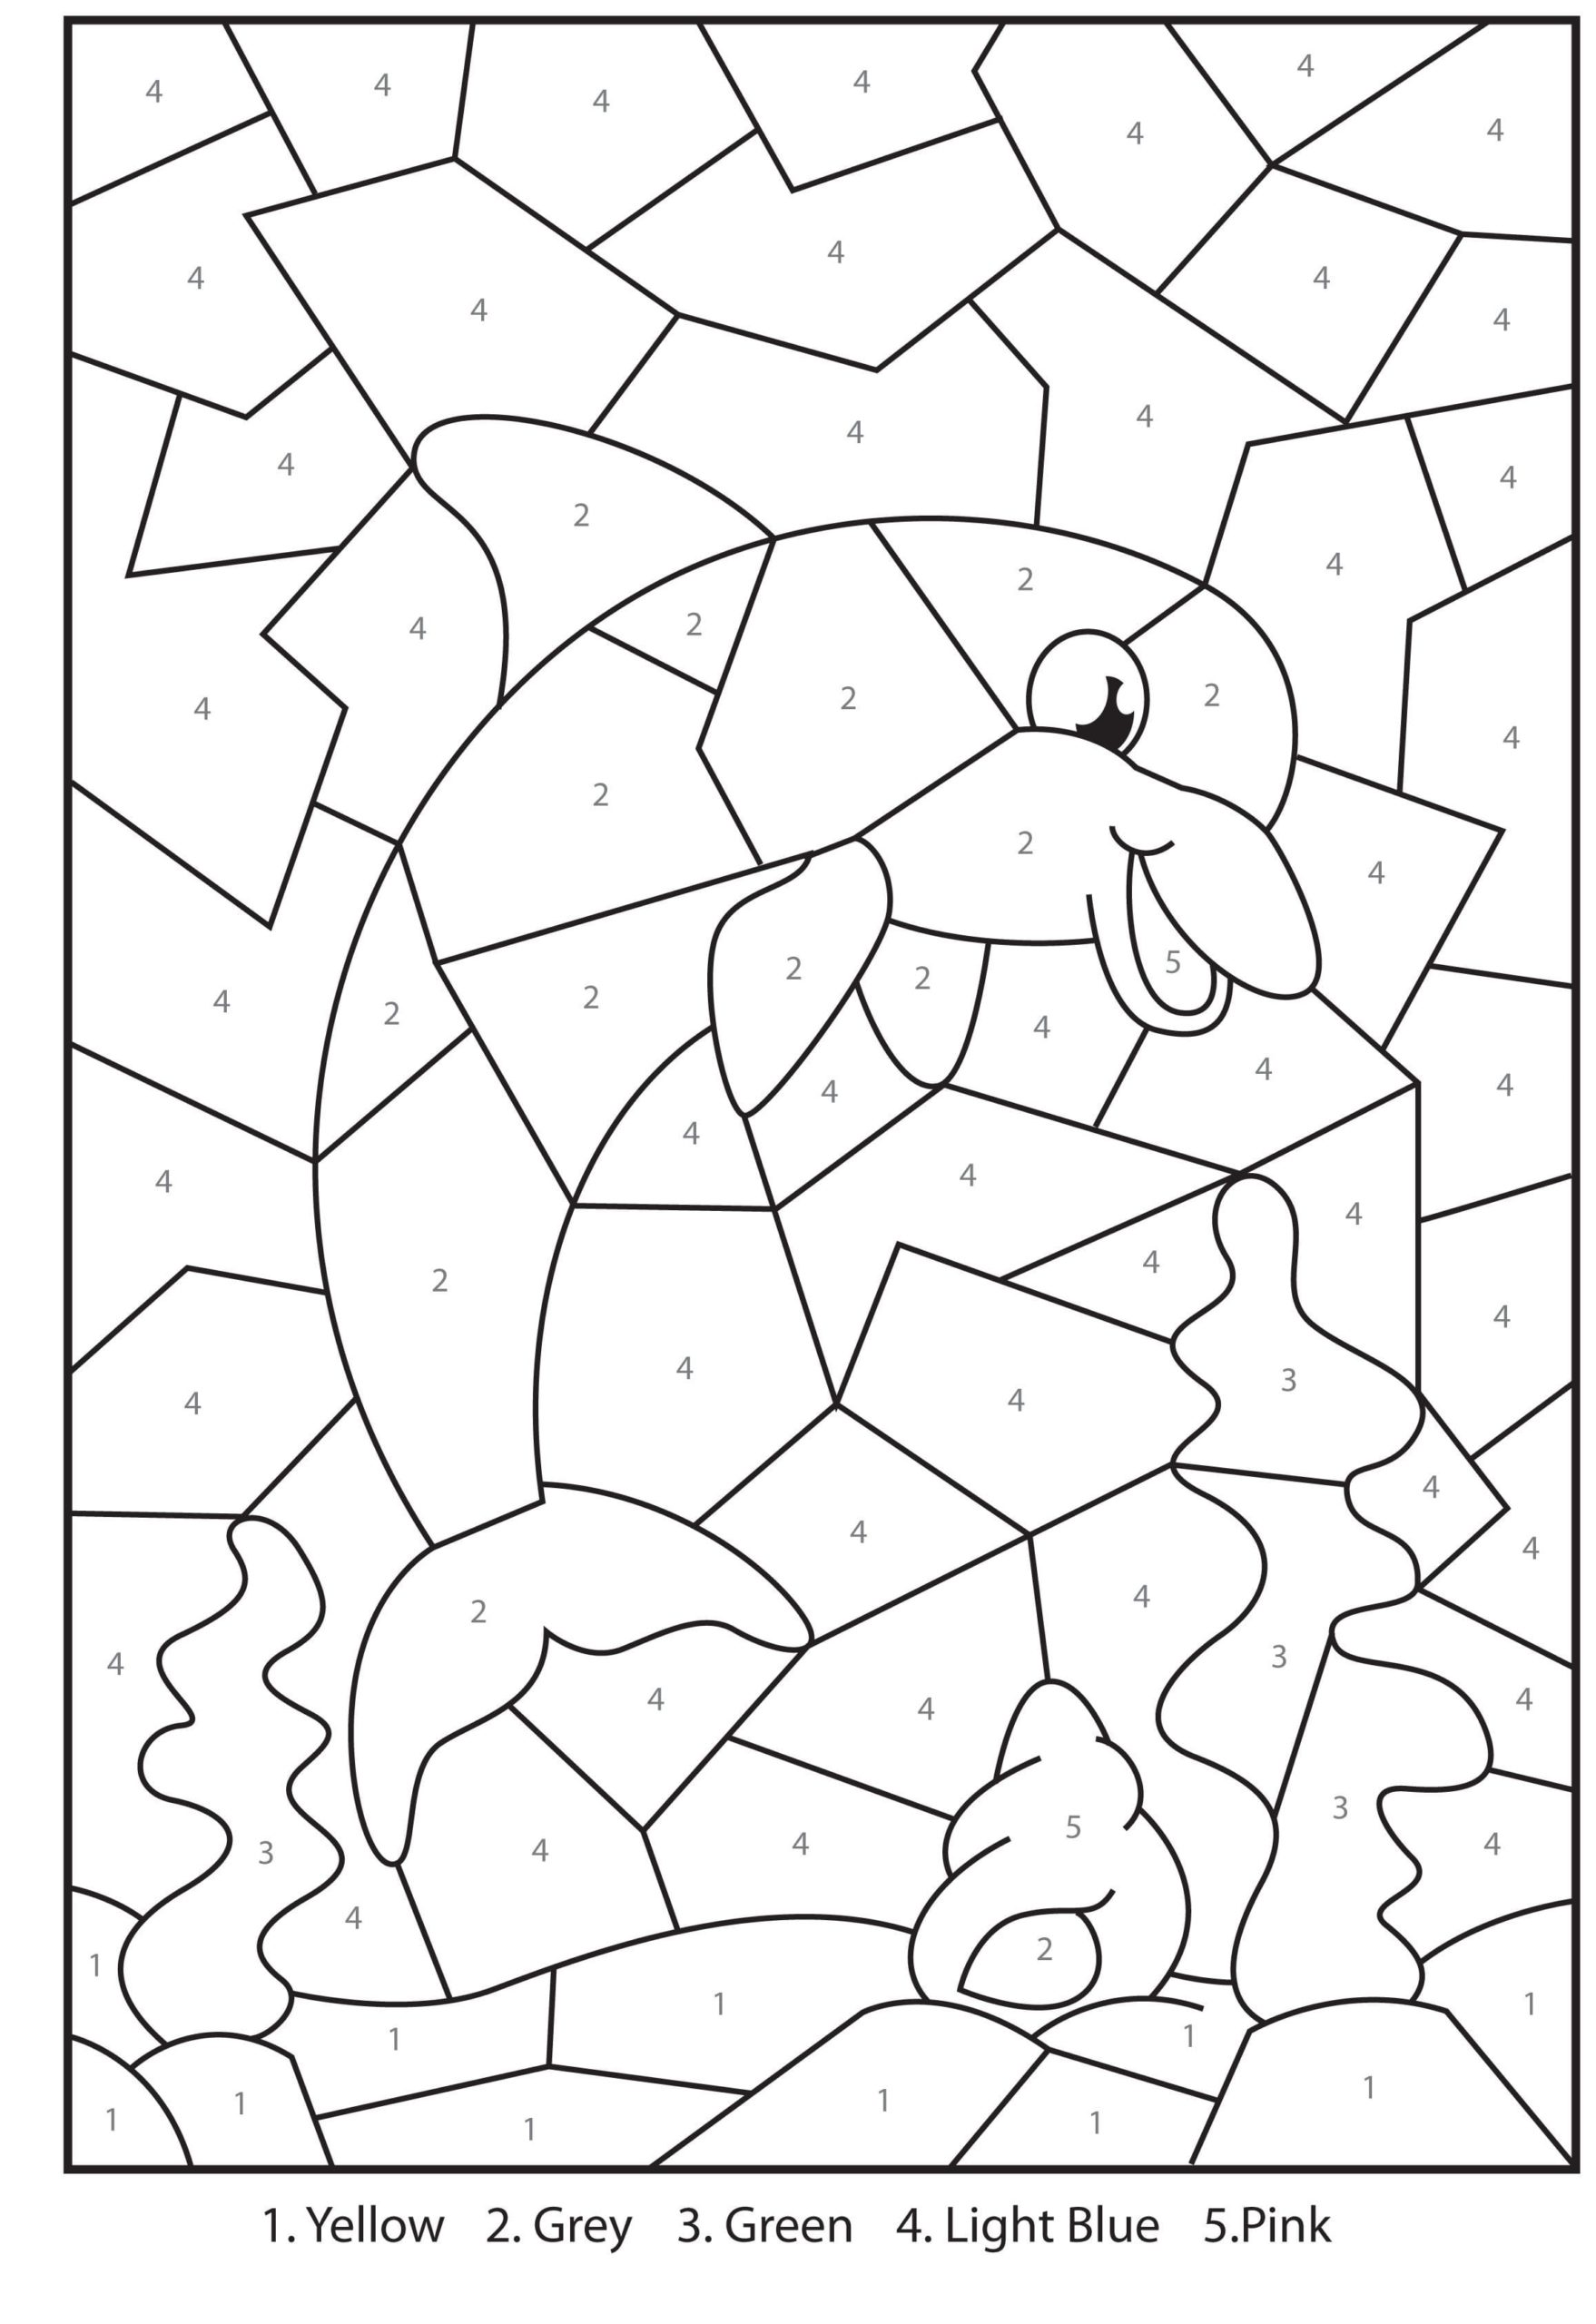 Raskrasil.com-Coloring-Pages-Color-by-Number-for-Adults-87